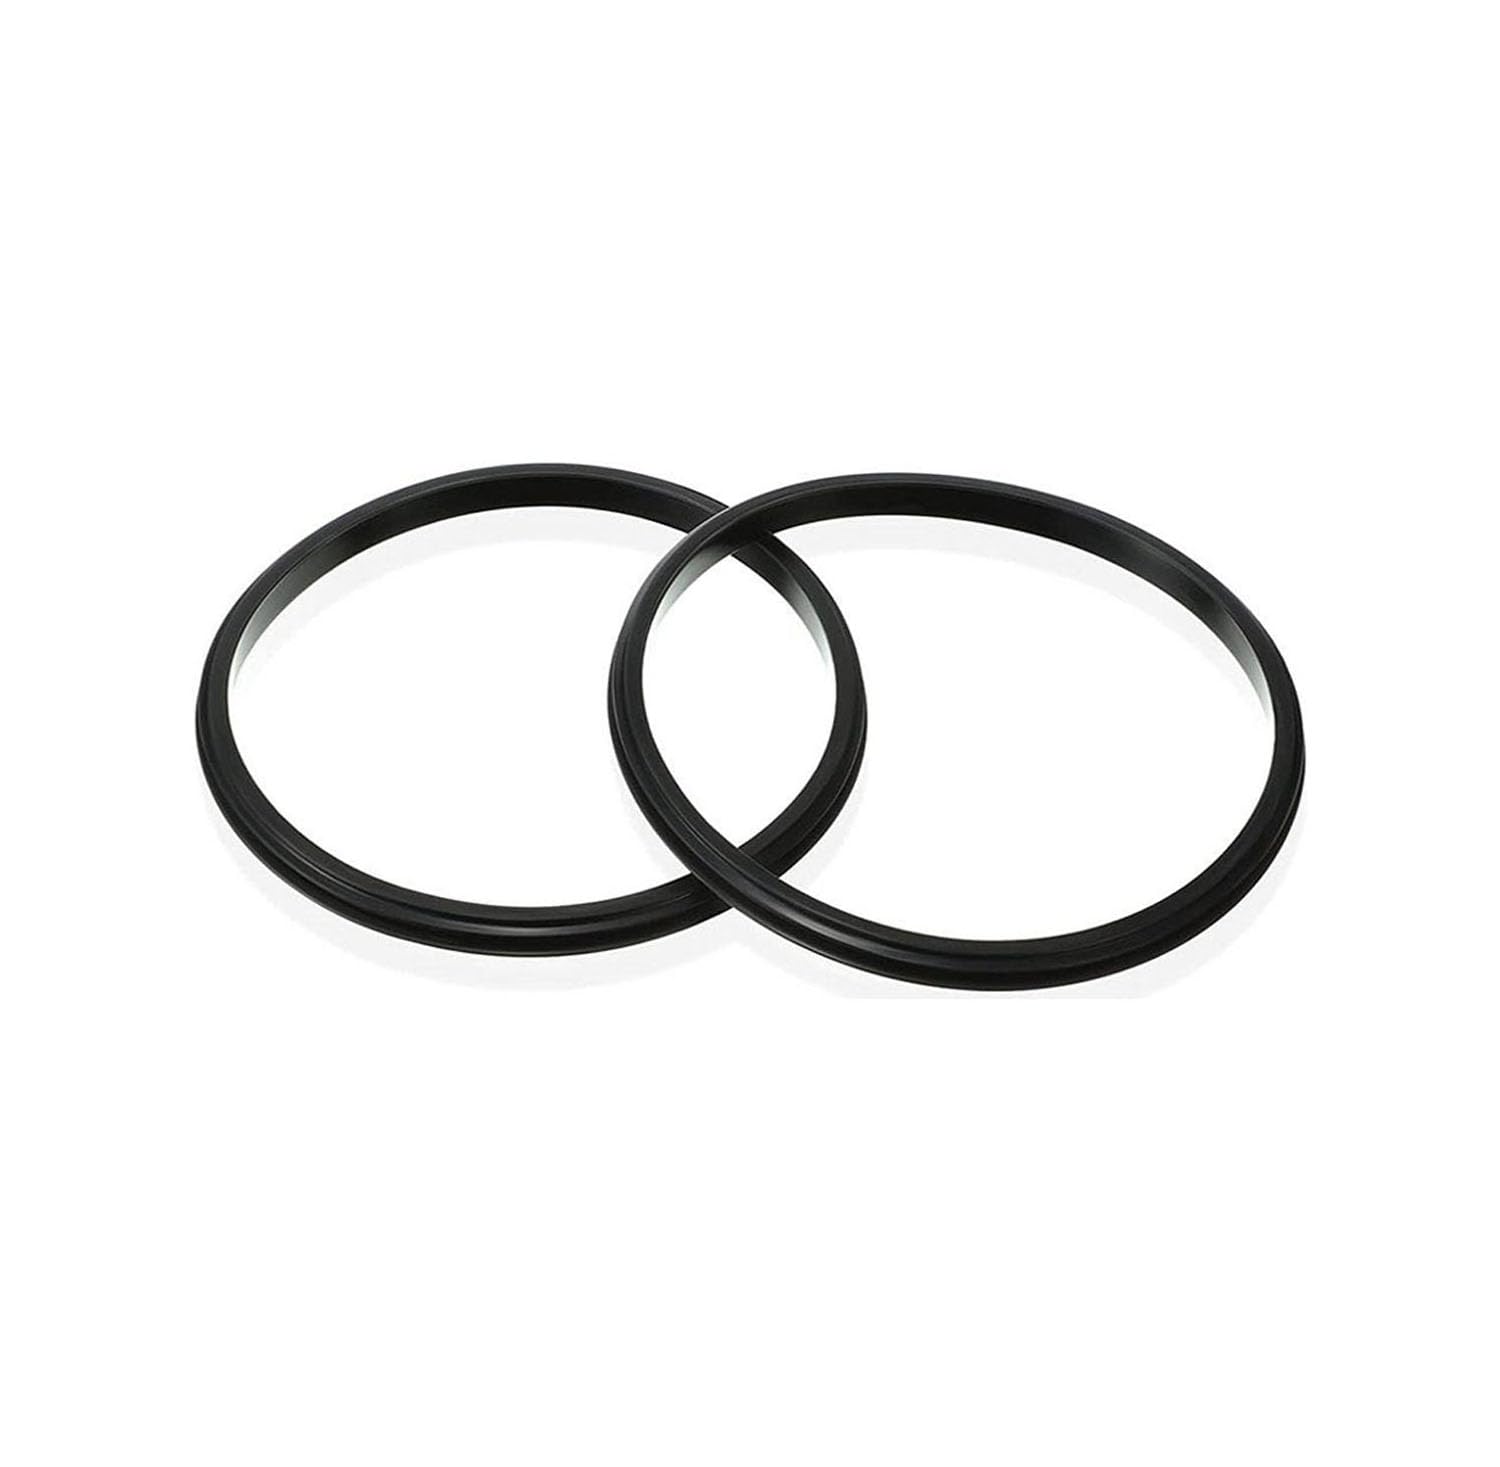 2 Pack Replacement Gasket for Contigo Travel Mug 16oz & 20oz, Water Bottles Lids Accessories, Silicone Lid Seal Replacements